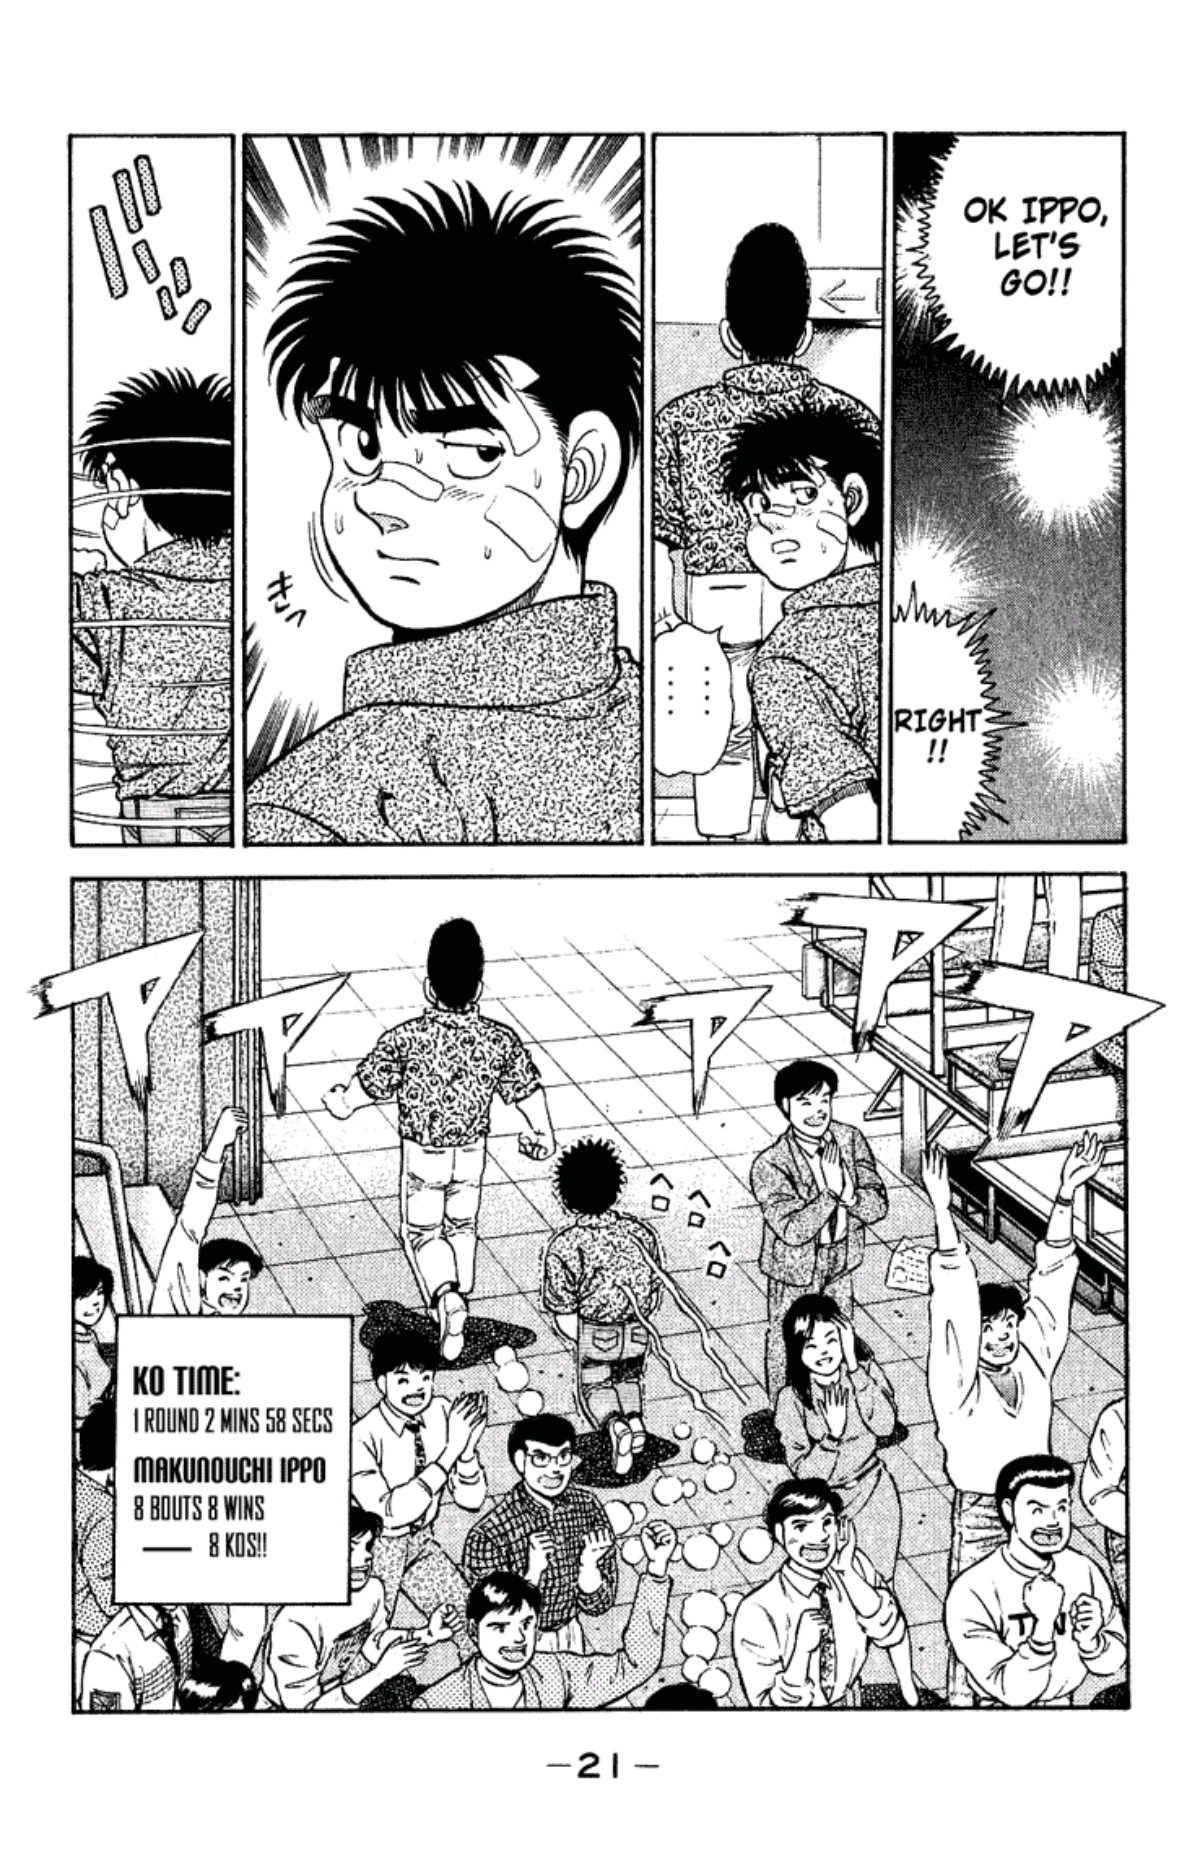 Takamura leads Ippo out of the hall. Ippo gives a stern look behind him at a fighter the crowd is cheering excitedly for. His record is 8 fights, 8 wins. 